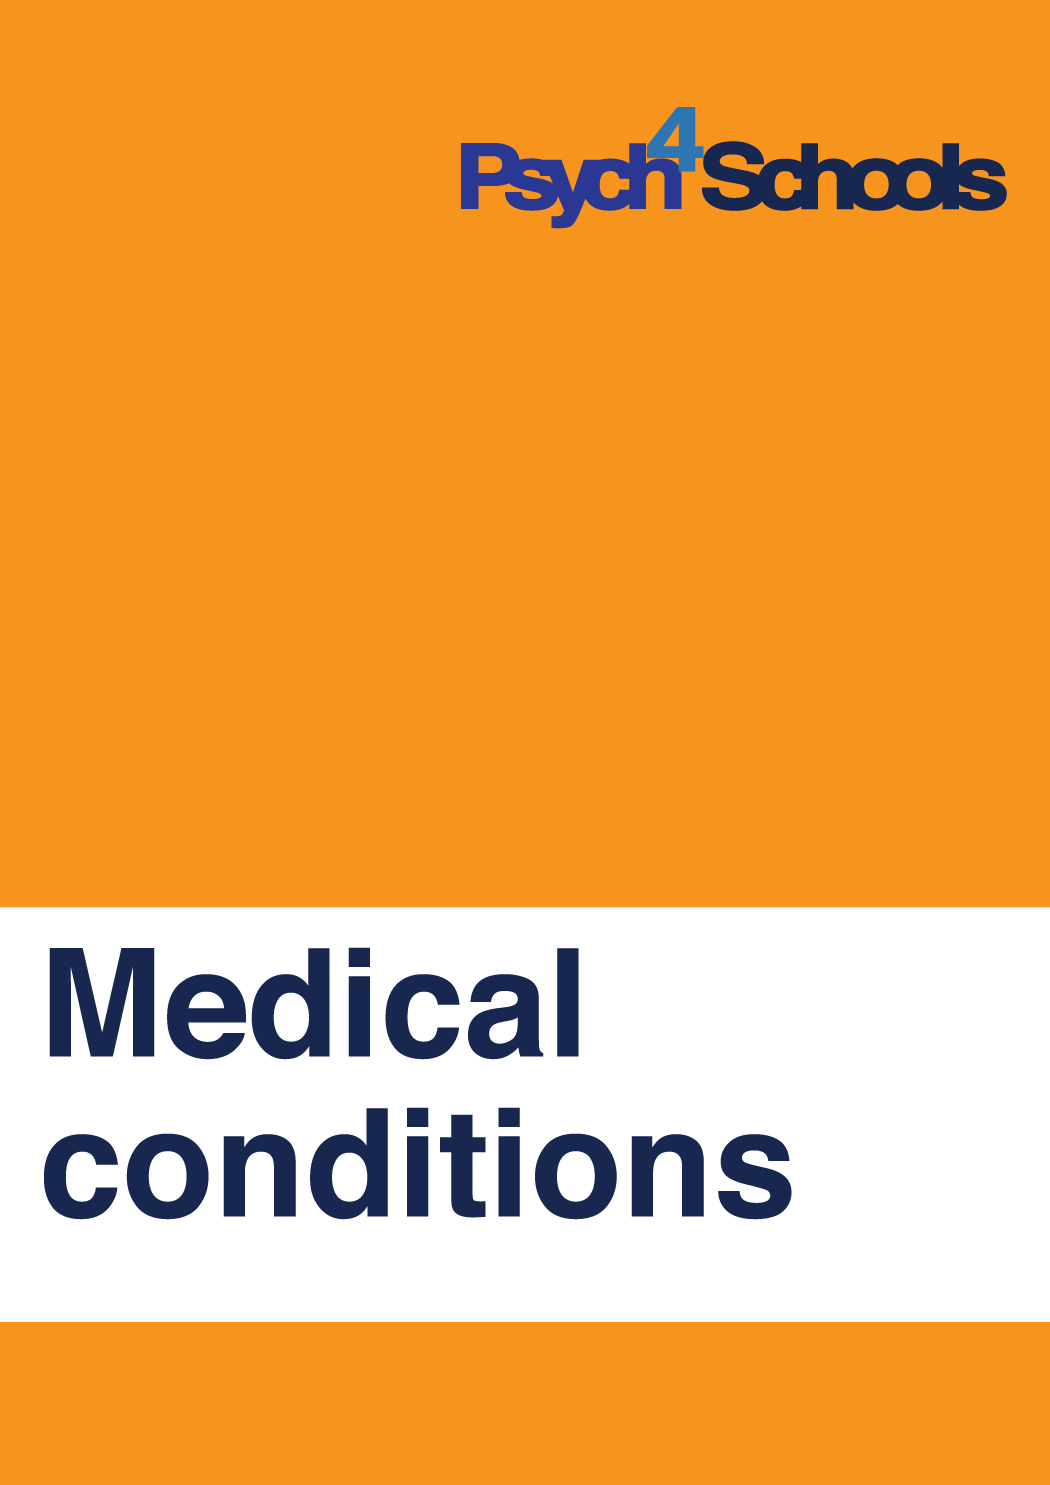 Medical conditions